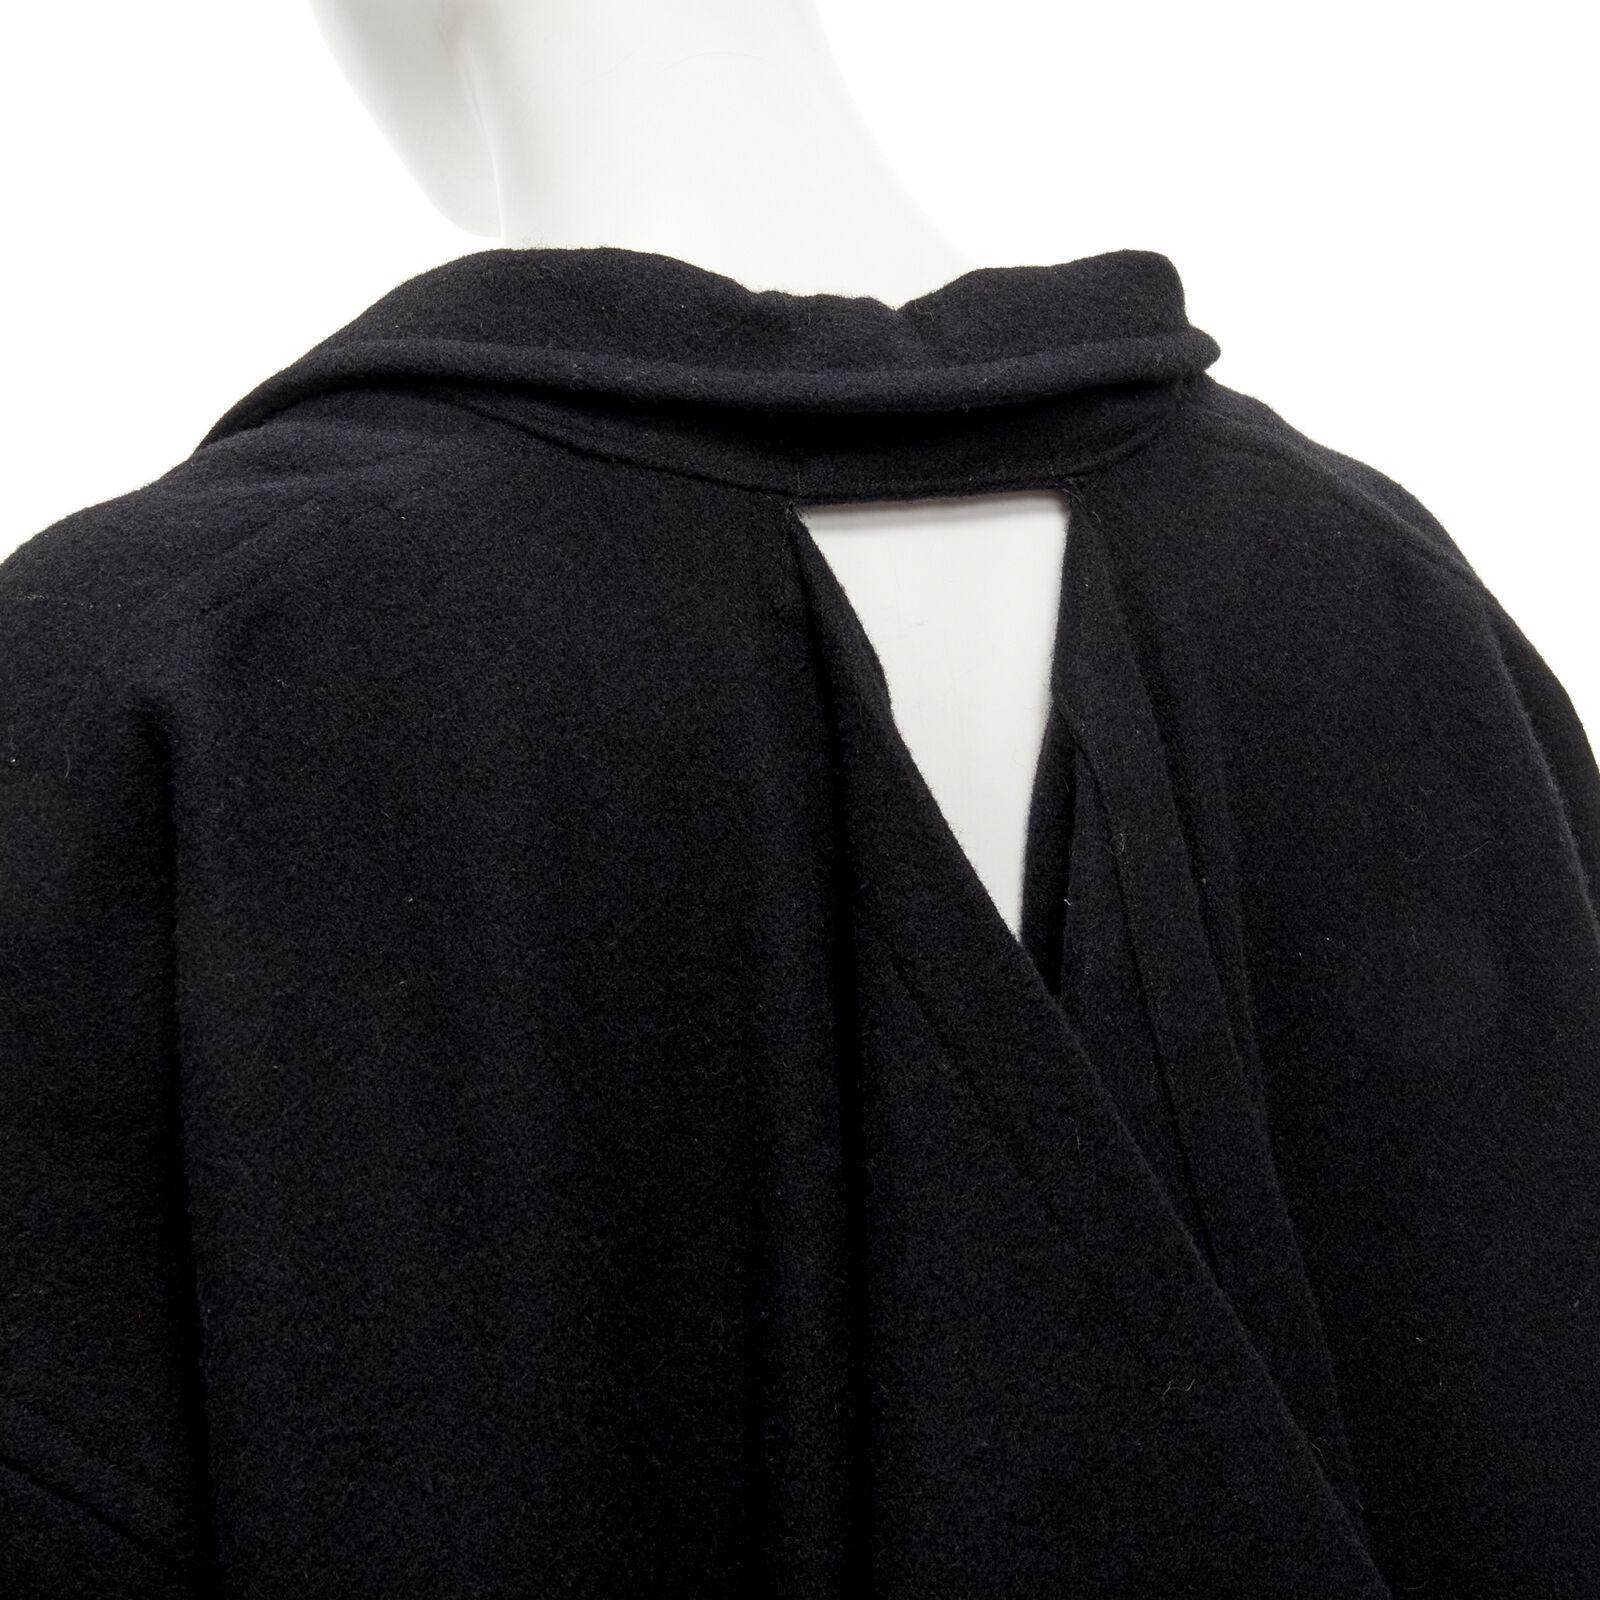 rare COMME DES GARCONS Vintage 1980's Dinosaur jagged cut out draped coat M
Reference: CRTI/A00697
Brand: Comme Des Garcons
Designer: Rei Kawakubo
Collection: 1980s - Runway
Material: Feels like wool
Color: Black
Pattern: Solid
Closure: Button
Extra